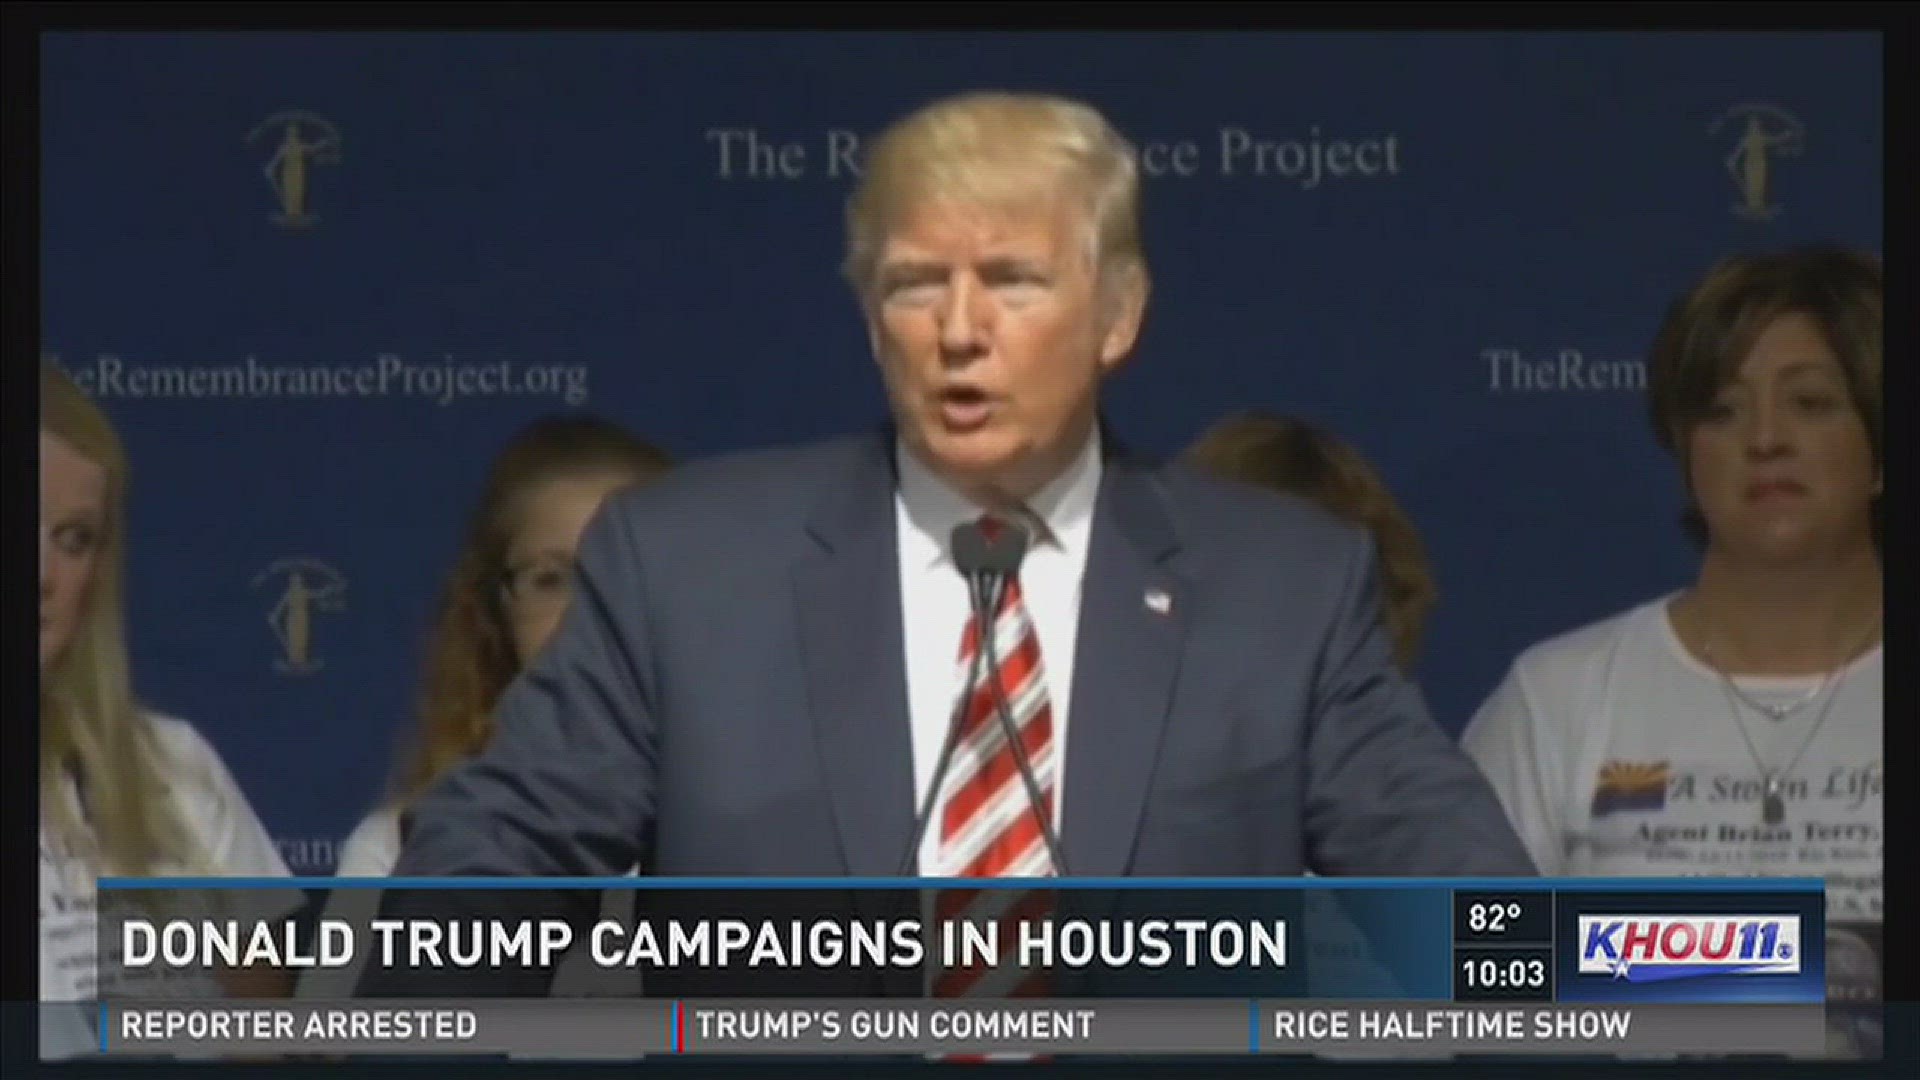 Trump spoke at the Omni Hotel in Houston on Saturday. He addressed the Remembrance Project - a group dedicated to helping the families of those who were killed by undocumented immigrants.